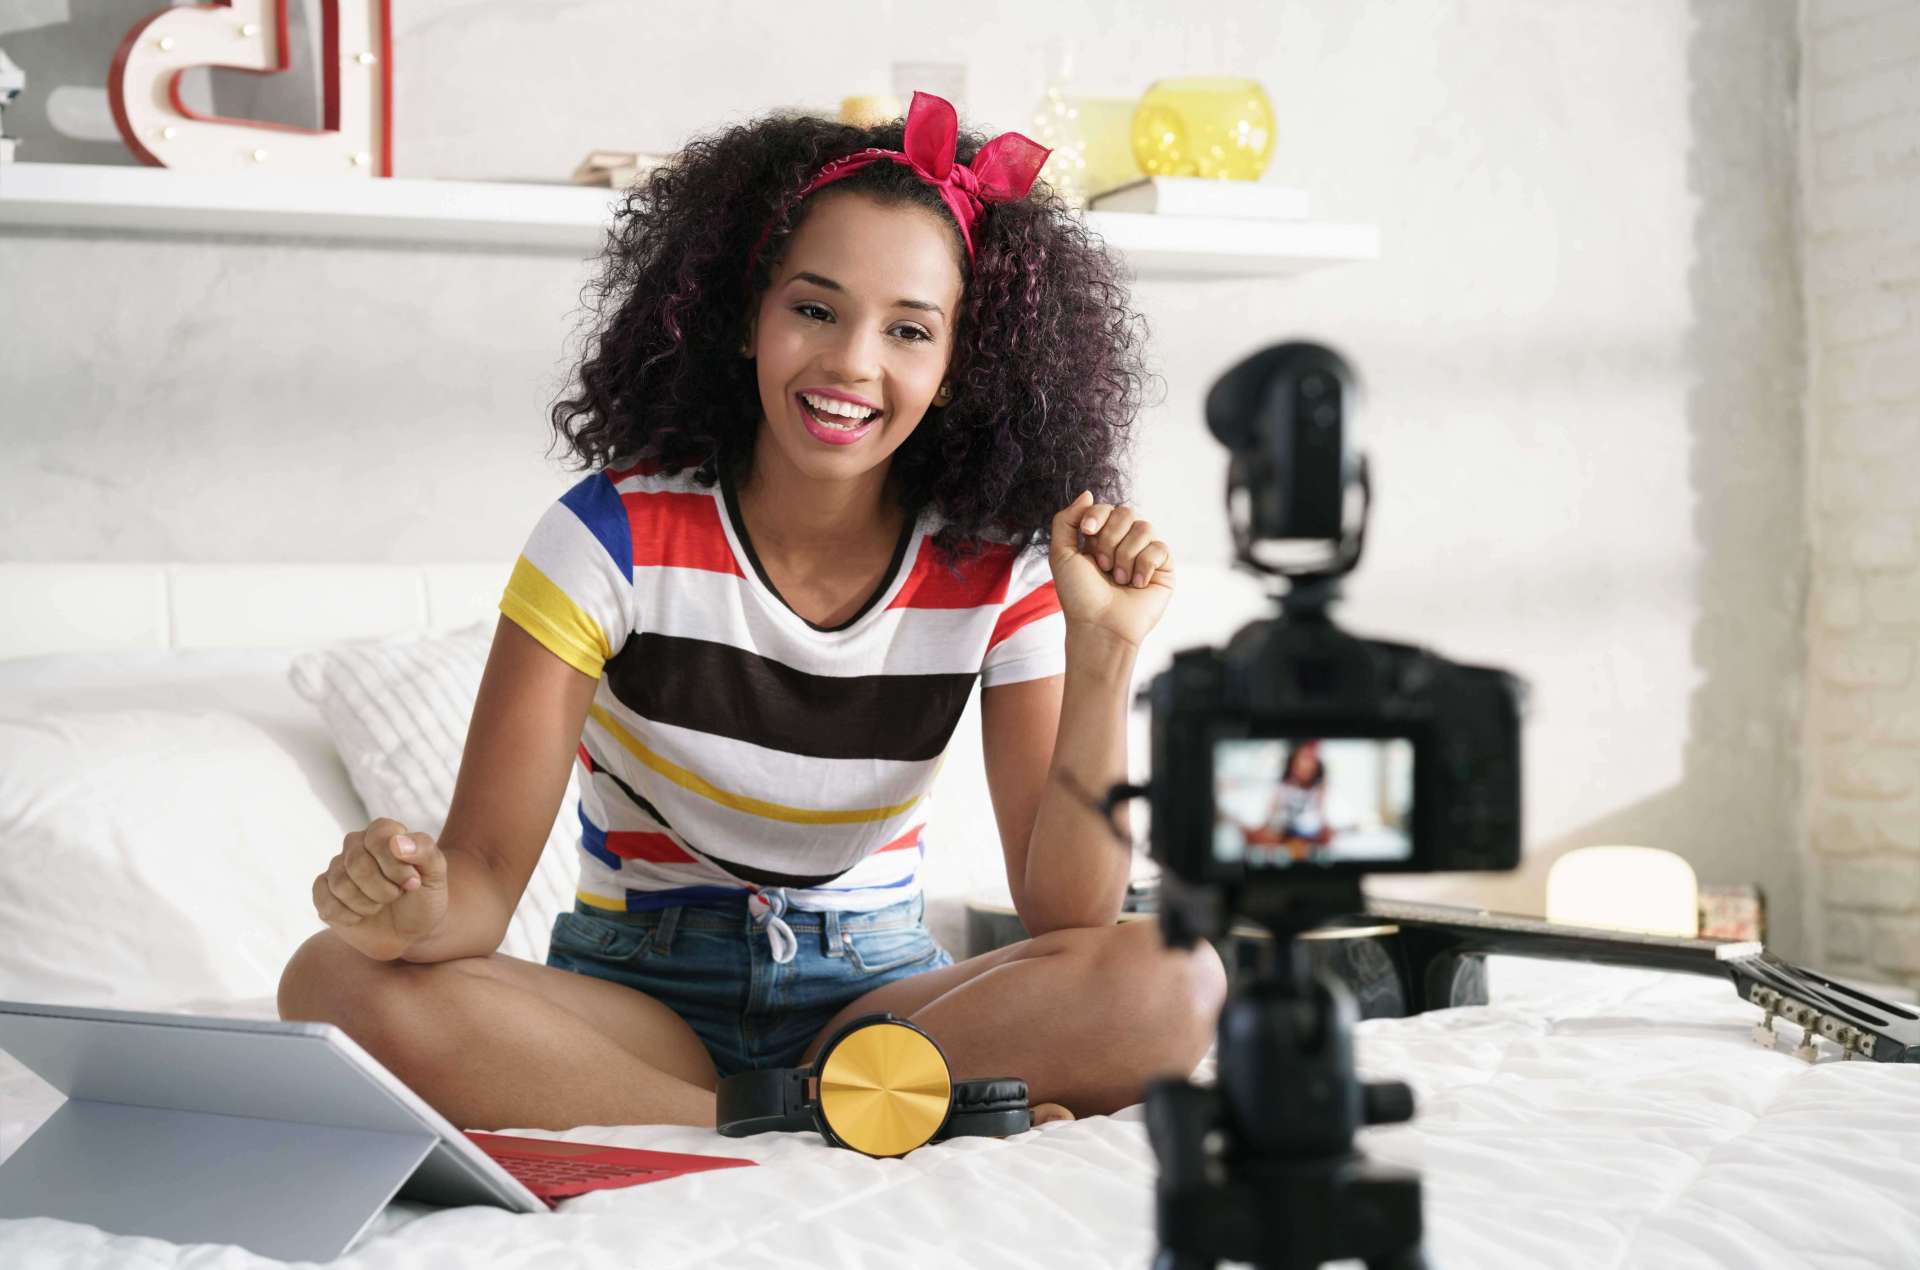 A girl recording a video and using a tablet